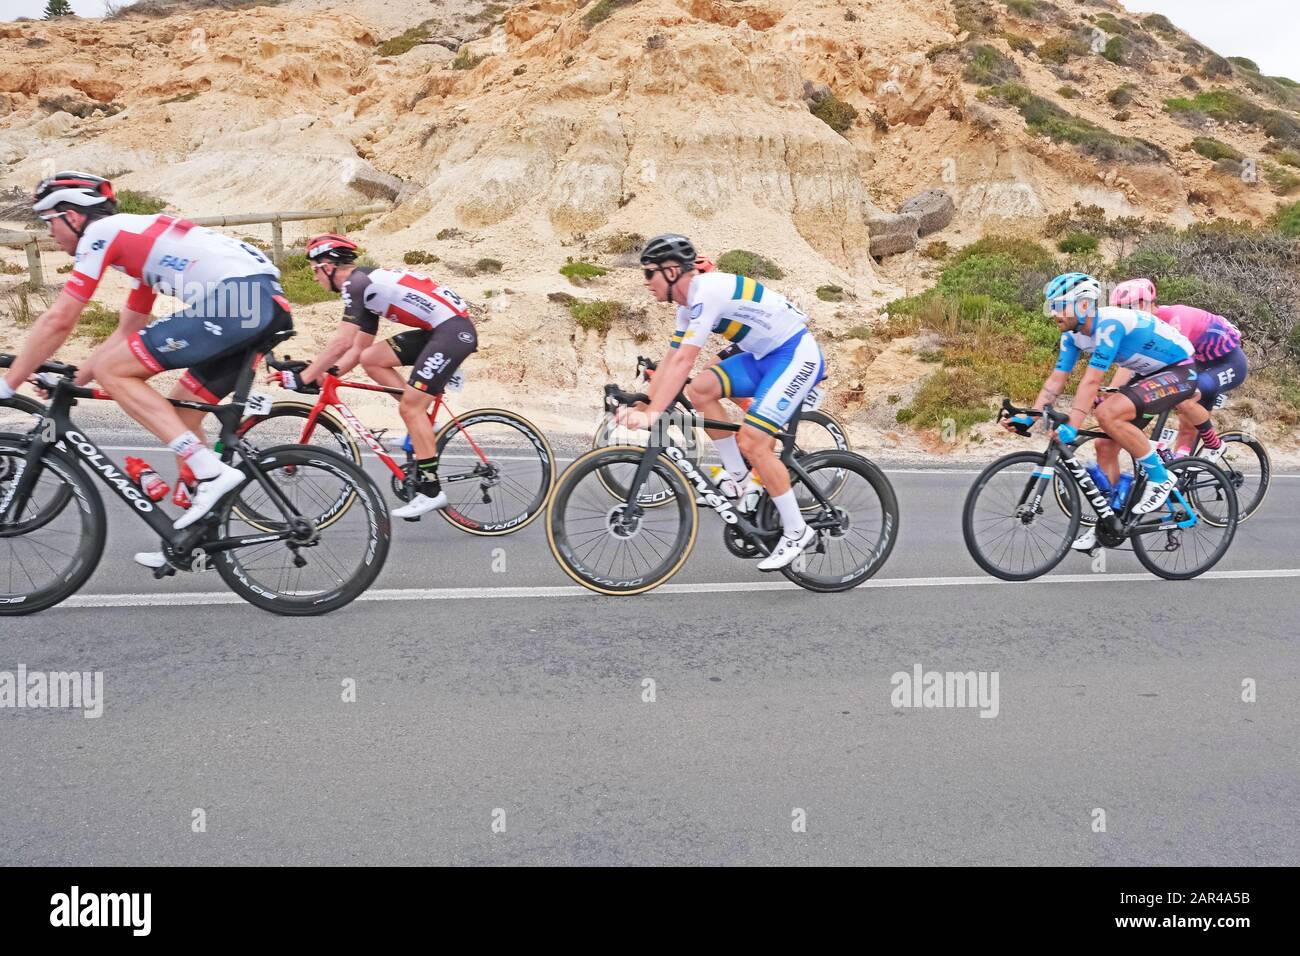 Aldinga, Adelaide, Australia. 26 January 2020. Riders competing on stage 6 of the Tour Down Under cycling race as it passes through the beachfront area of Aldinga. The stage winner was British rider Matthew Holmes of the Lotto Soudal team. He is the second rider in the shot (number 34). Credit: Russell Mountford/Alamy Live News. Stock Photo